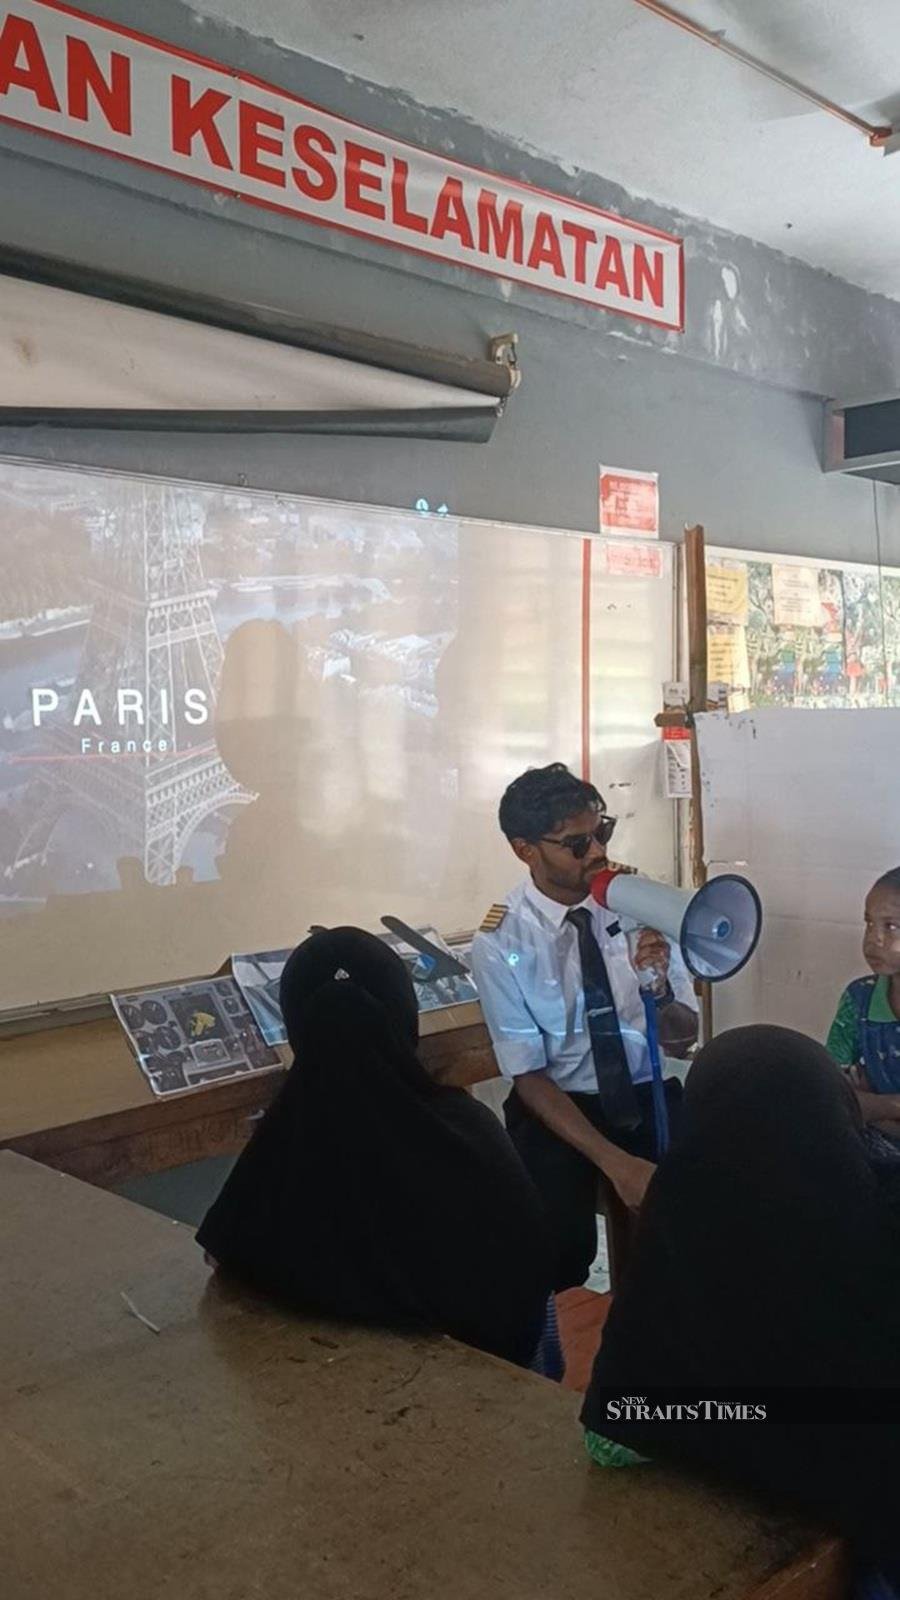  Shawn the 'pilot' taking his students on a flight to Paris, France.